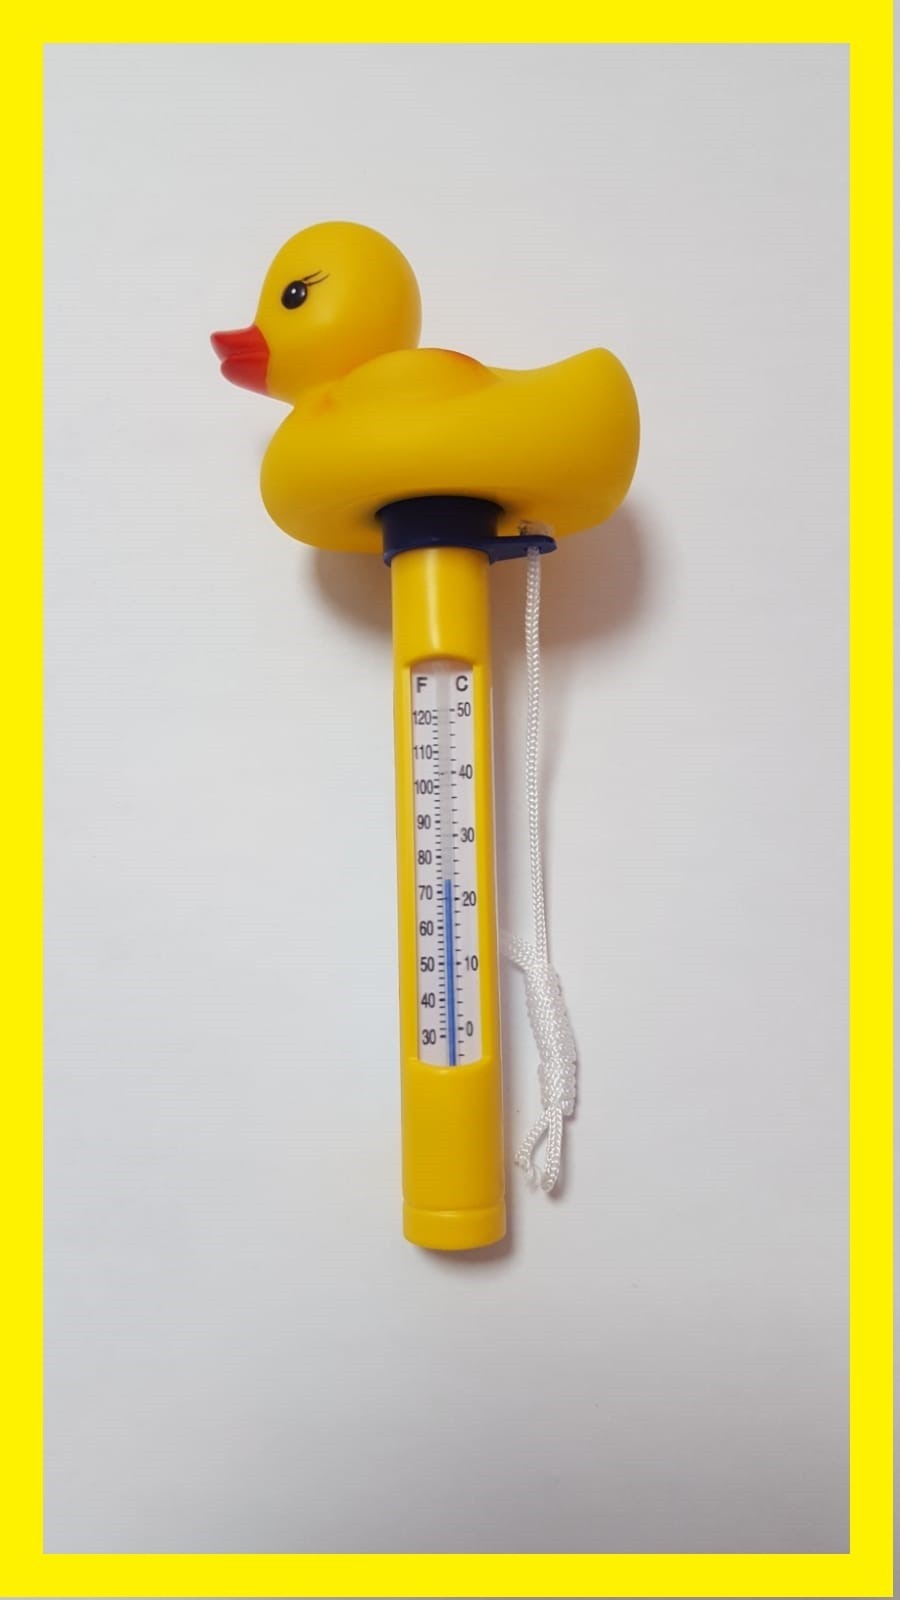 Pool Thermometer Ente